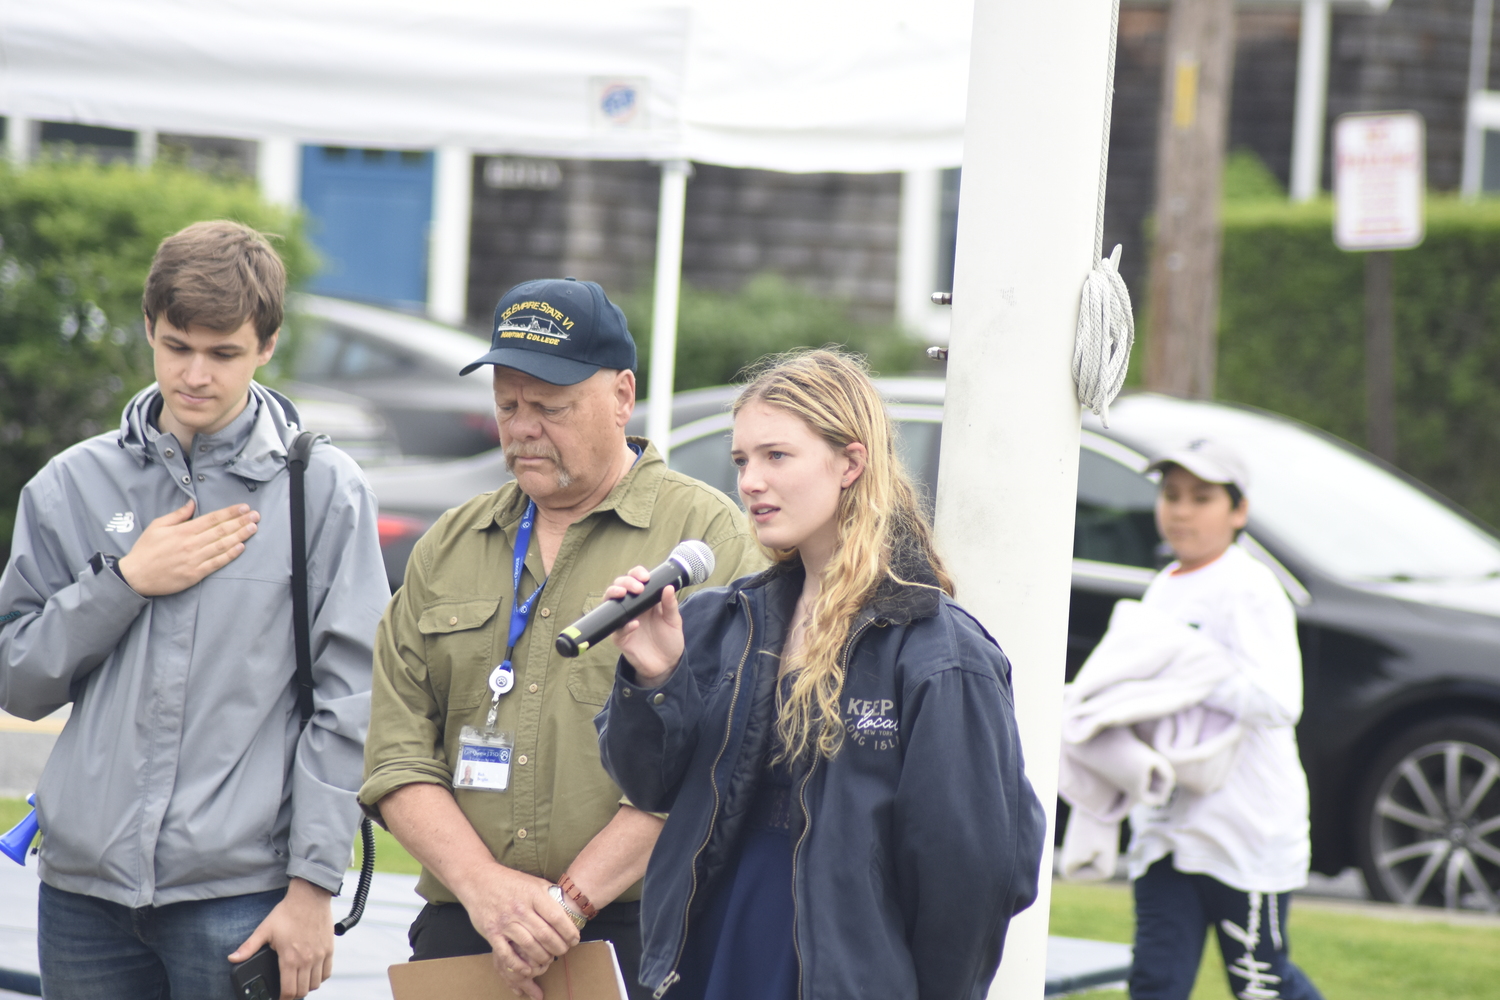 Rosalie Judd, a Westhampton Beach senior who graduated from East Quogue Elementary, sang this year's national anthem just prior to the start of this year's race.   DREW BUDD